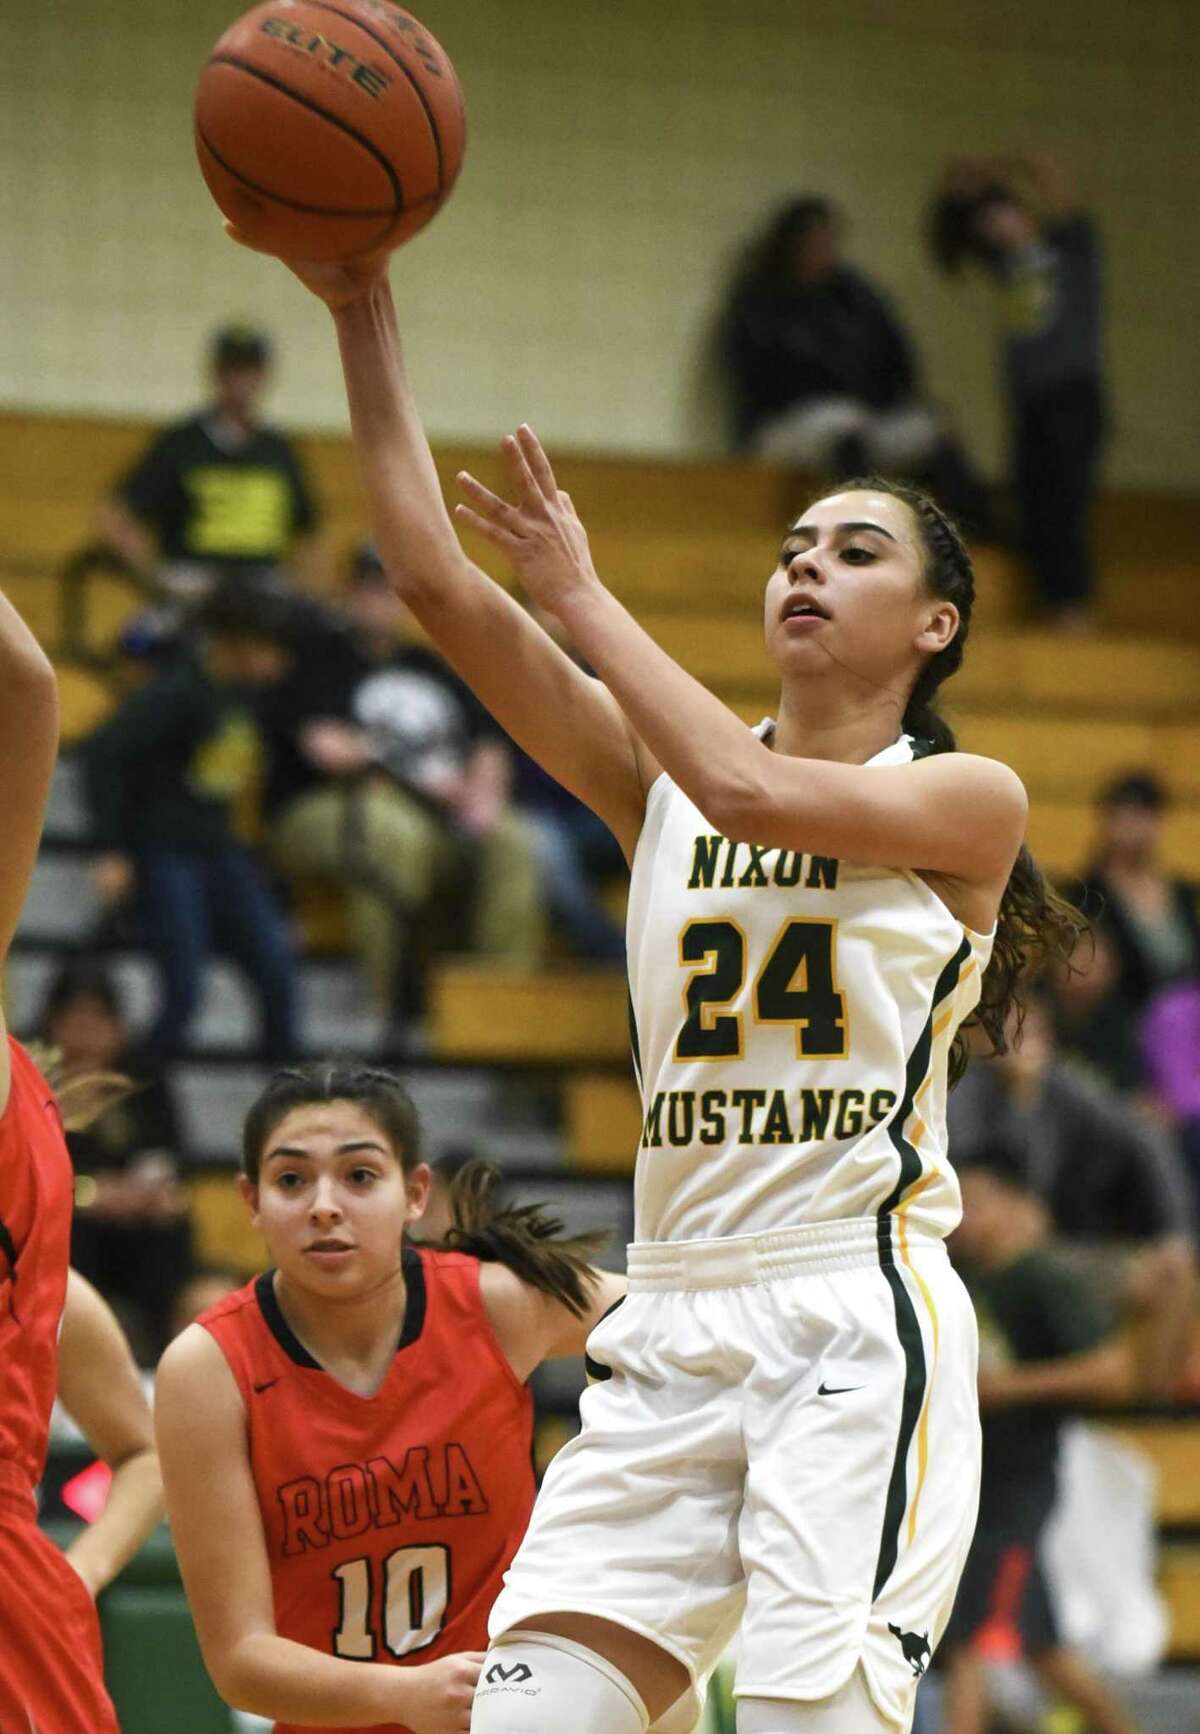 Nixon’s Jennifer Pena was one of four Laredo athletes named to an All-Region team by the TABC.